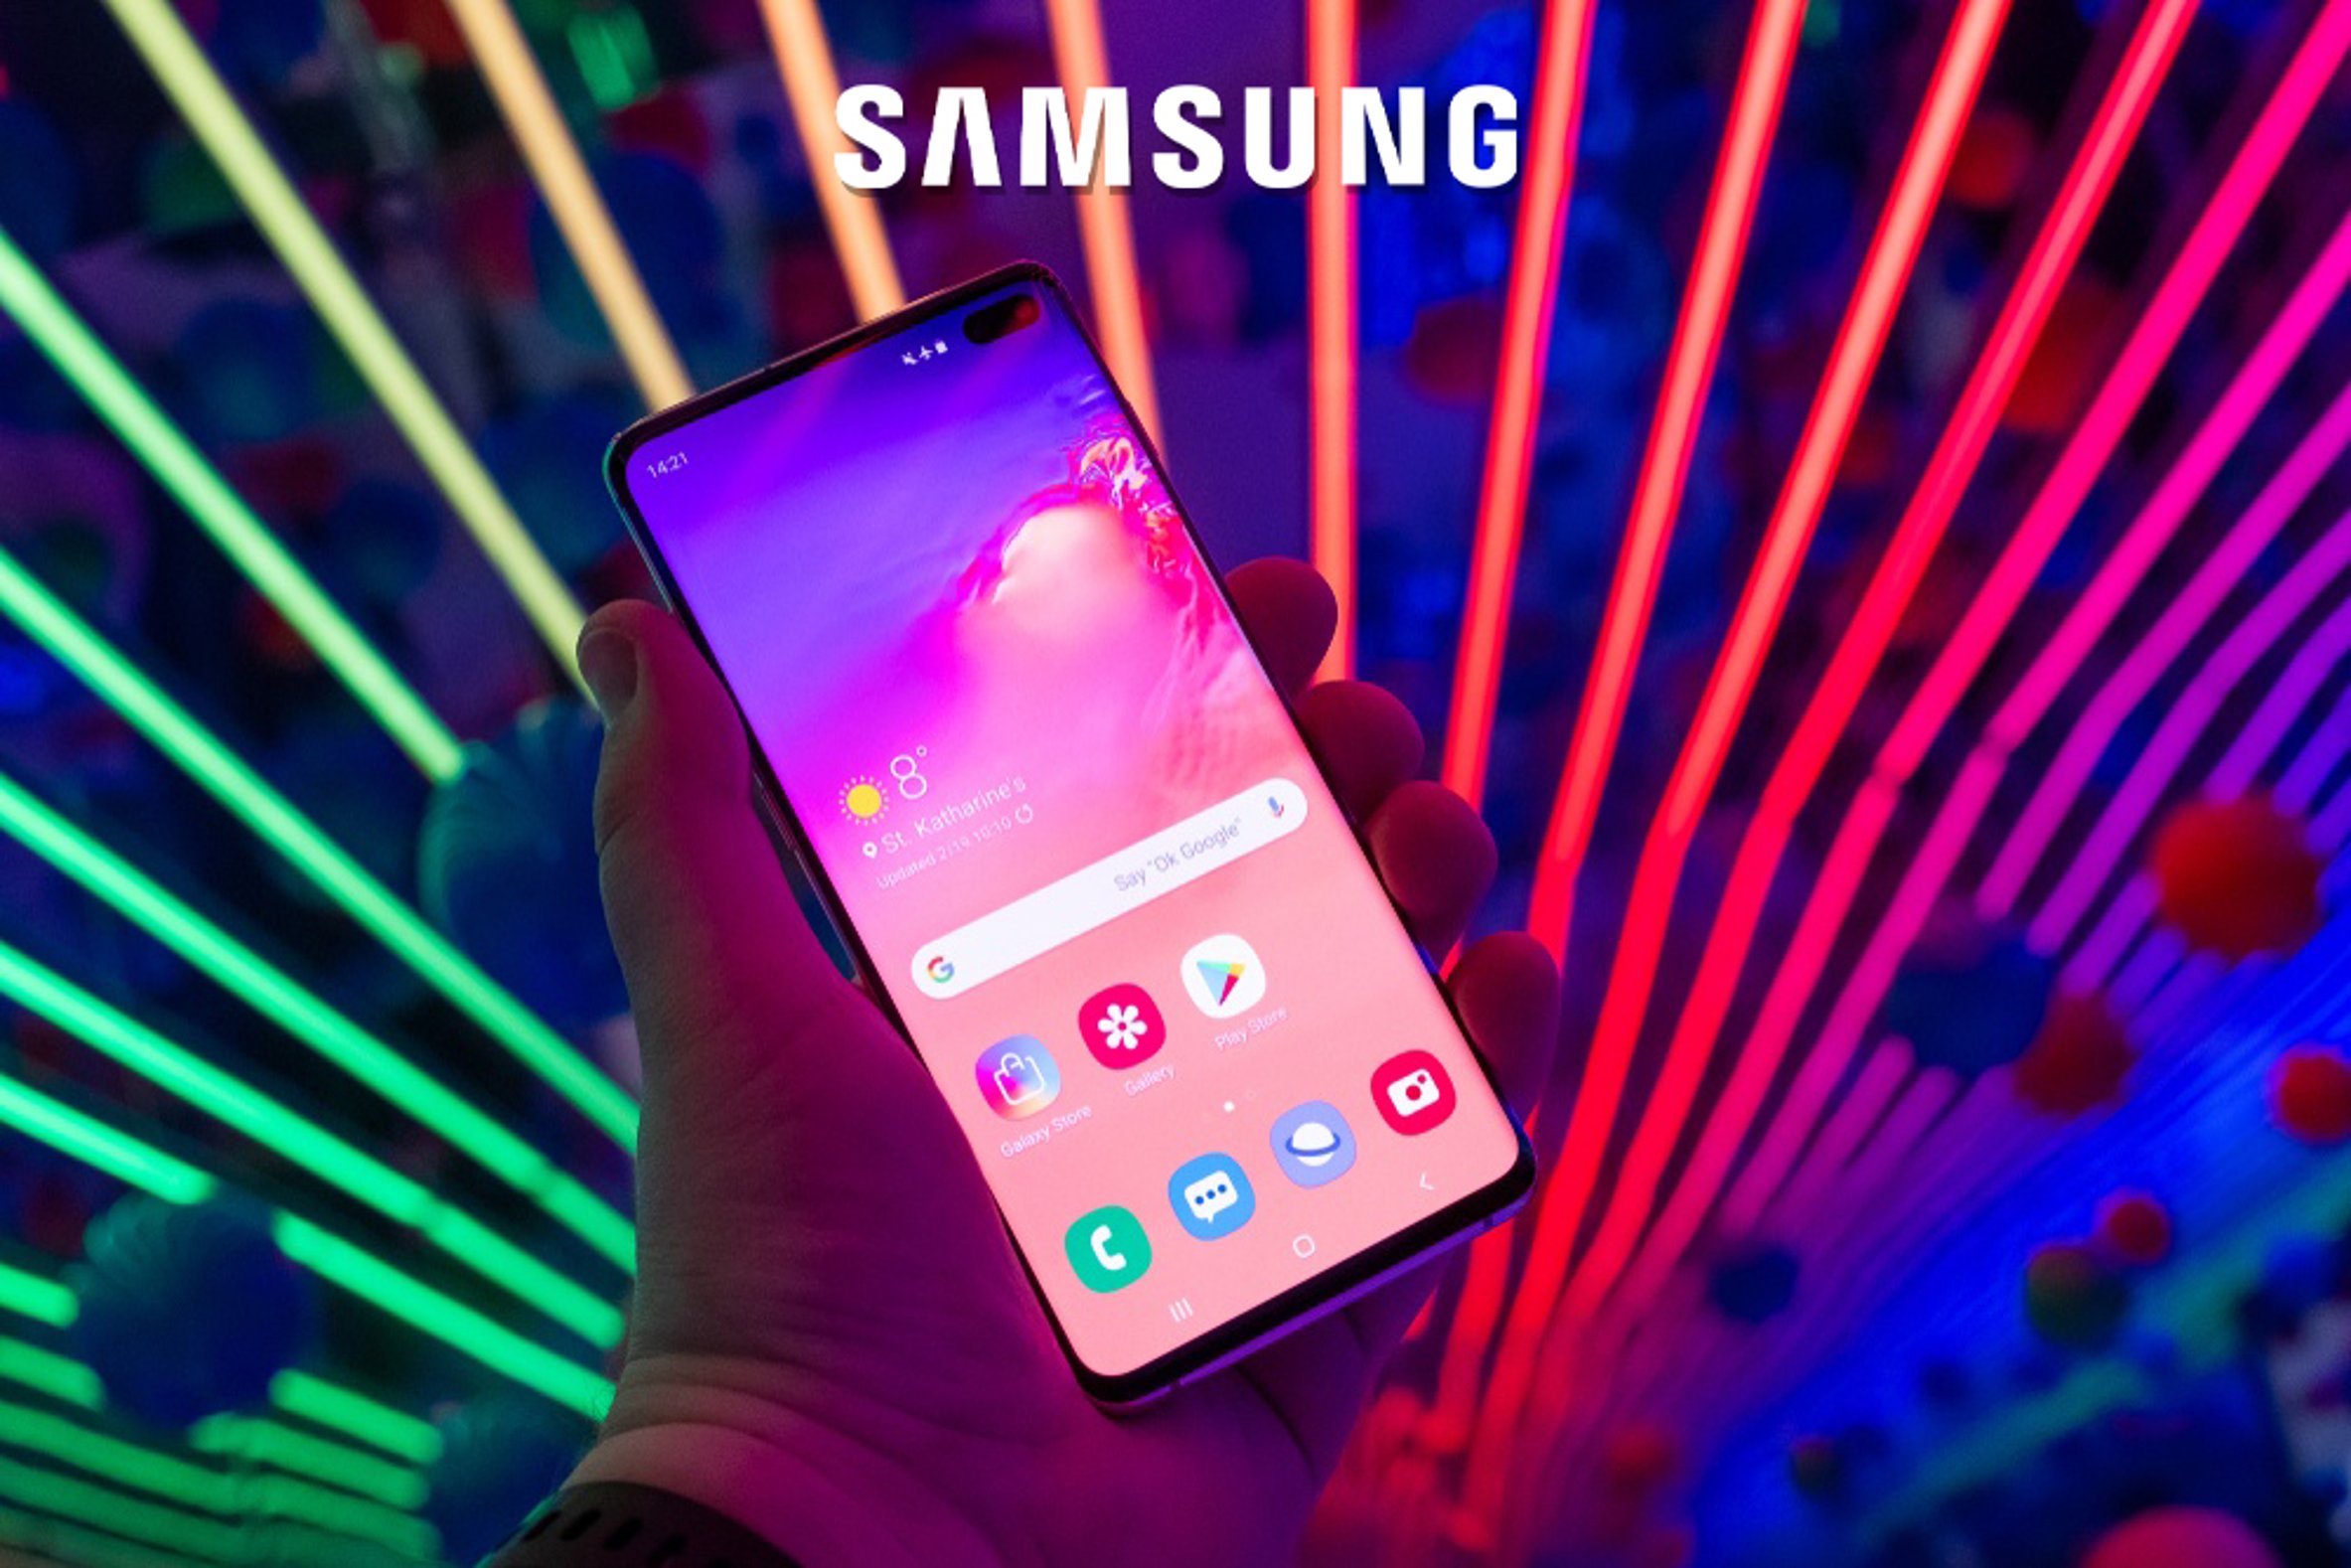 Samsung Galaxy Commercial Is Casting For Models!